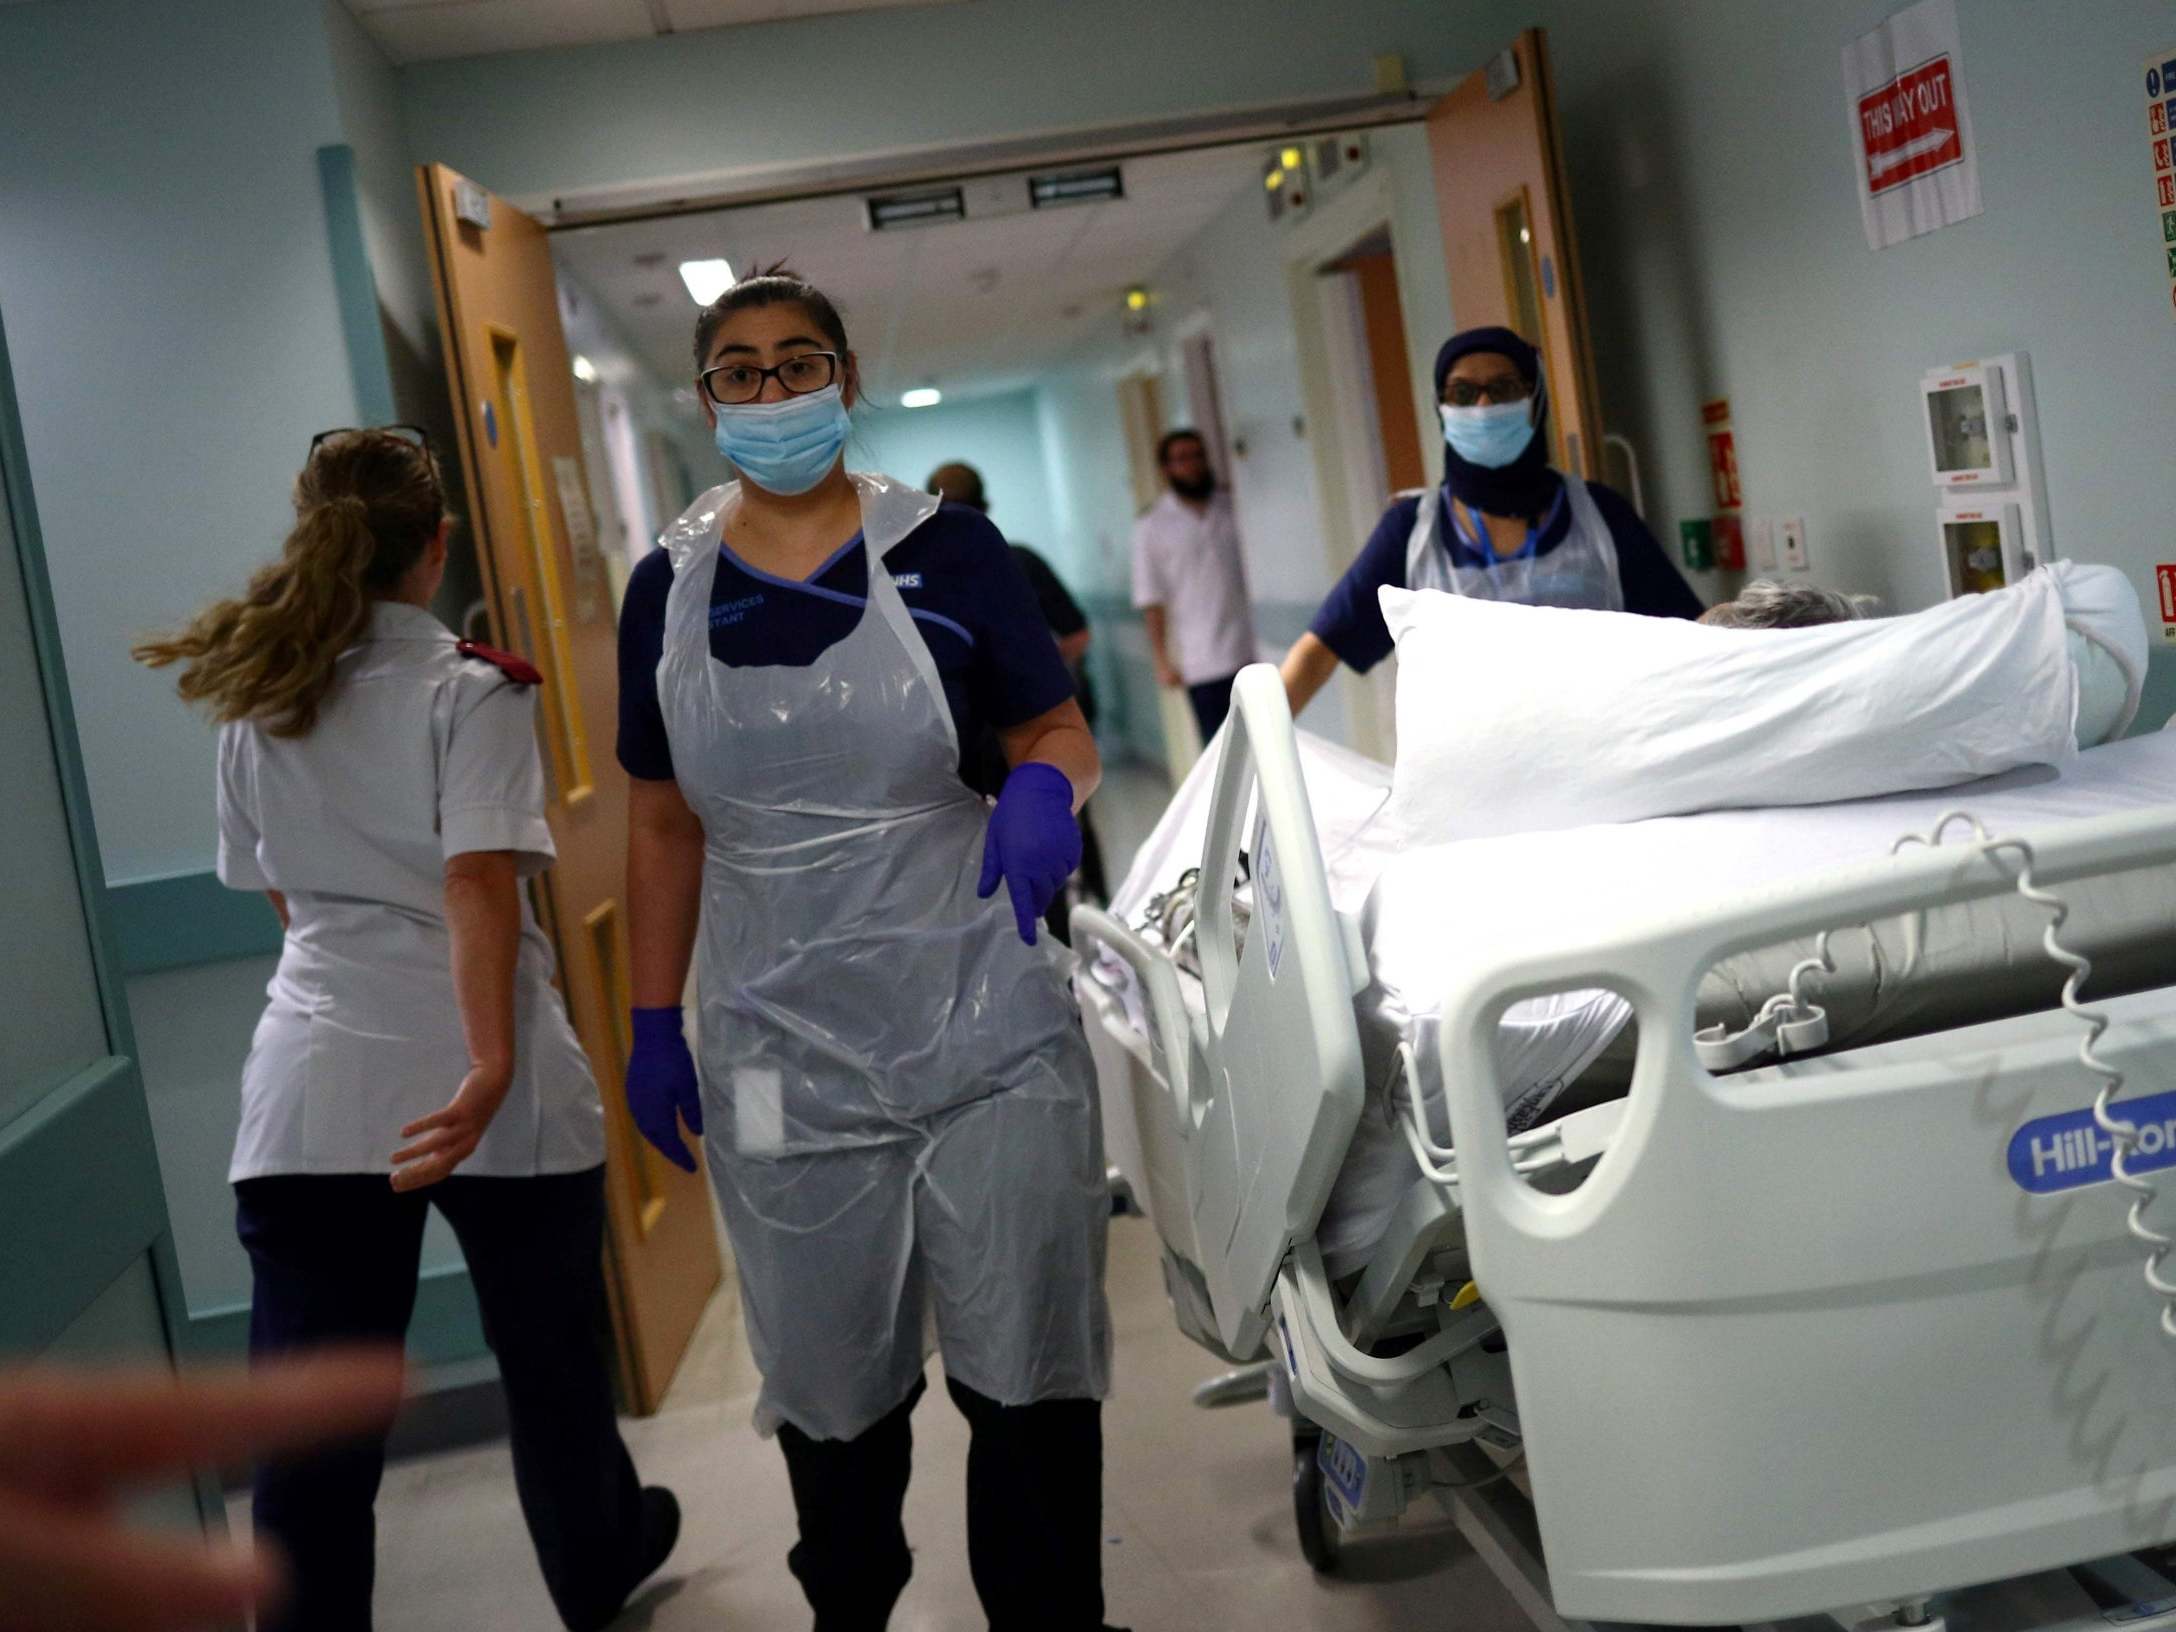 Medical staff transfer a patient along a corridor at the Royal Blackburn Teaching Hospital in Blackburn, north-west England on May 14, 2020